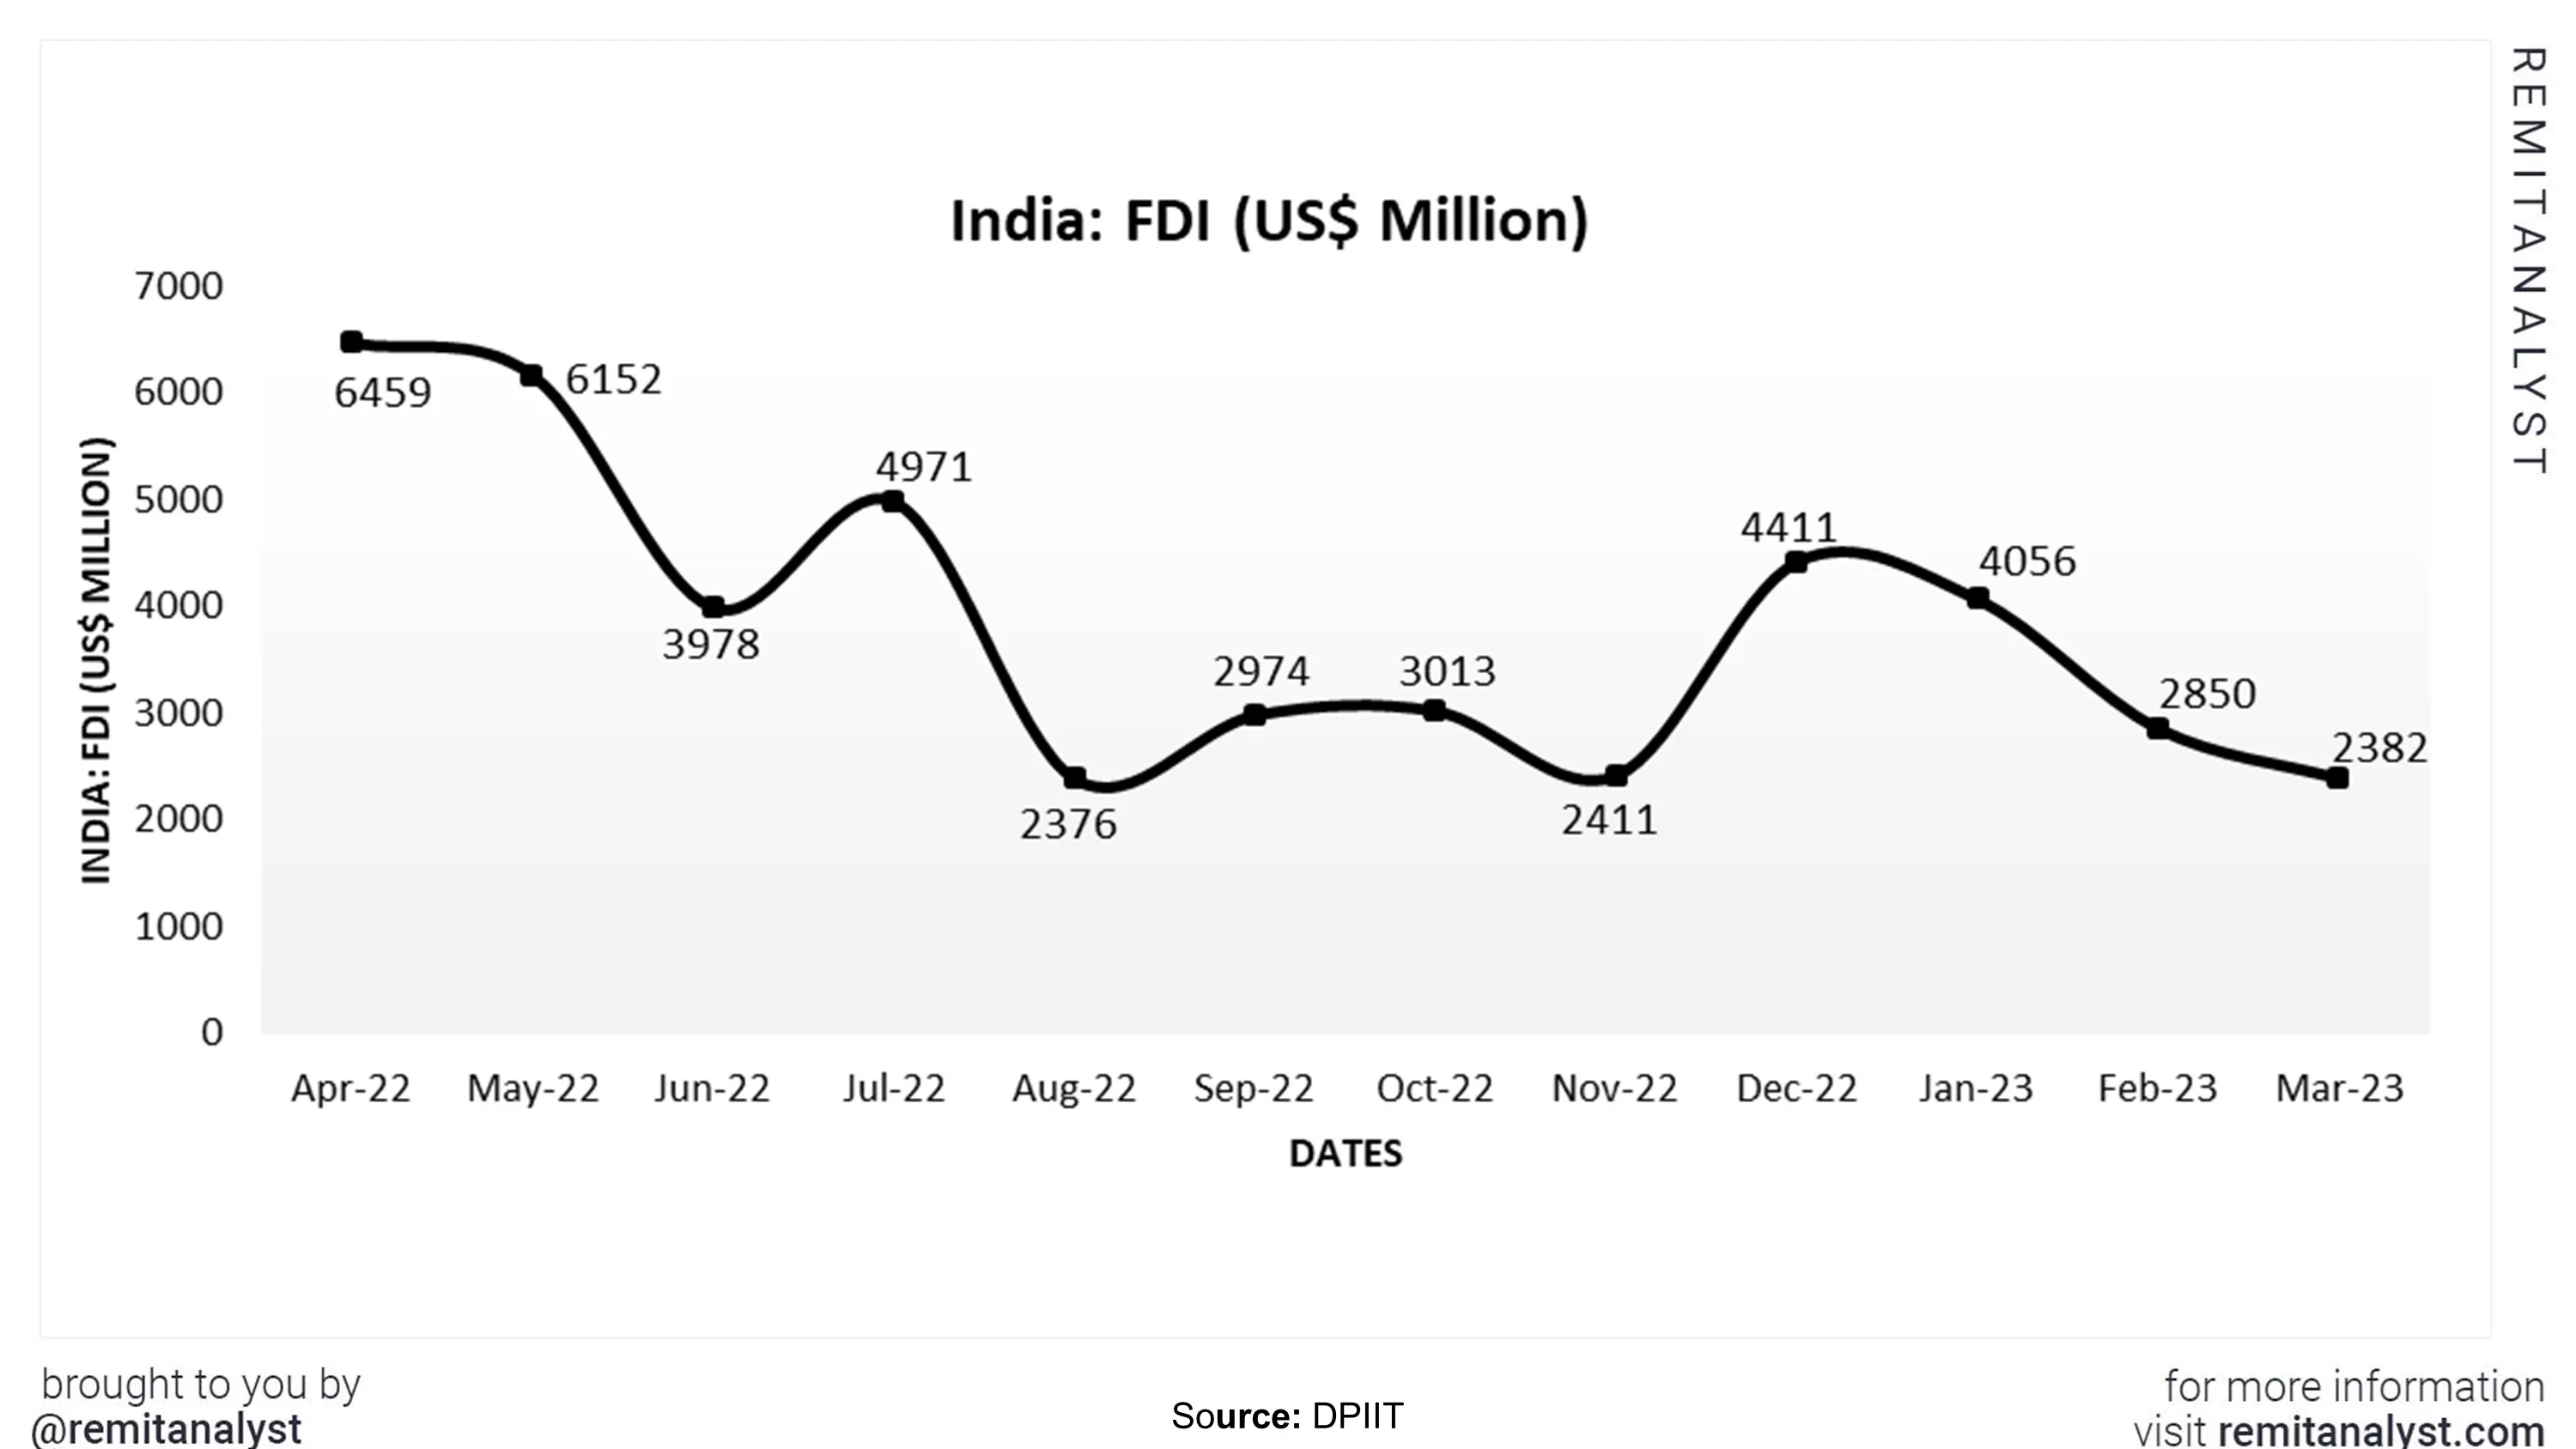 fdi-in-india-from-apr-2022-to-mar-2022